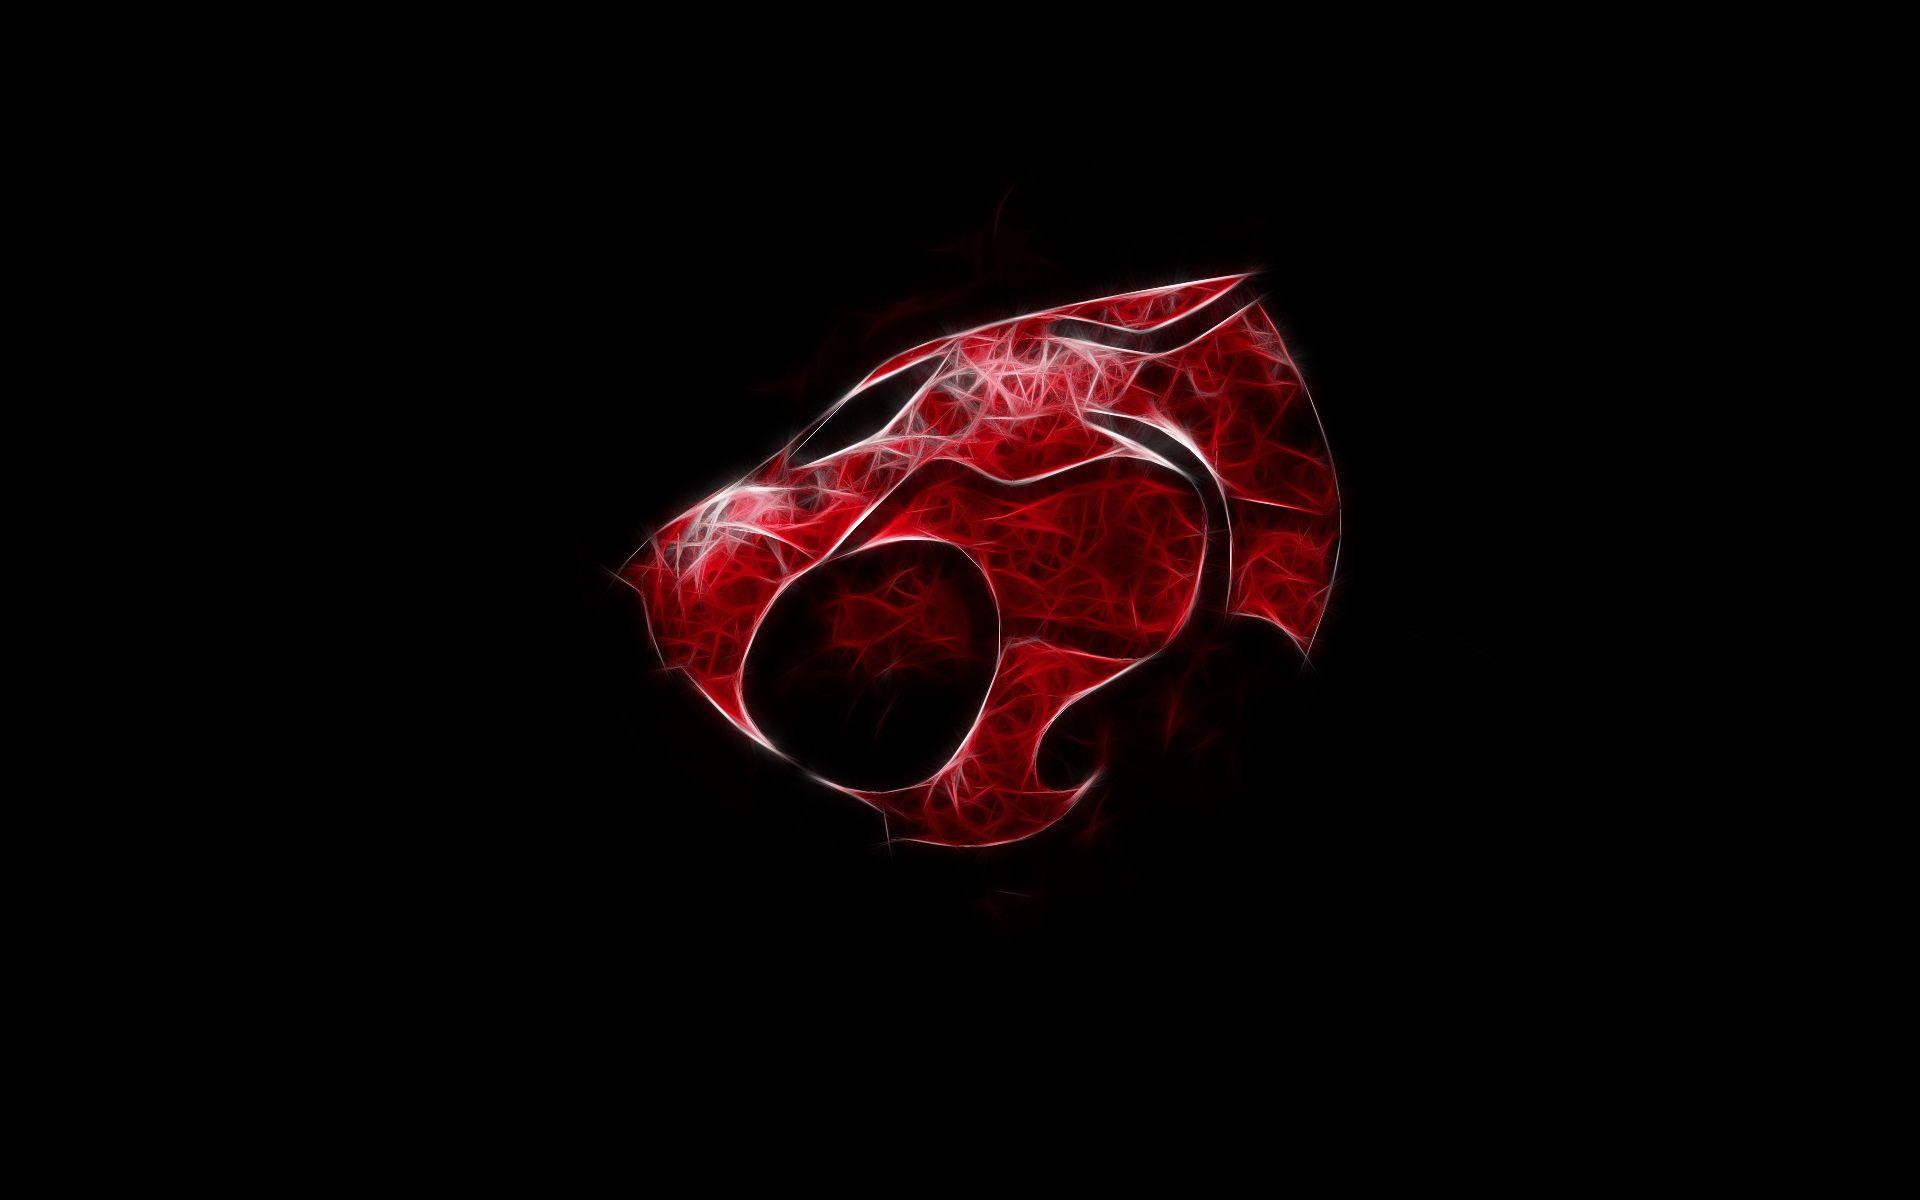 Black and Red Wolf Logo - Black-and-Red-Wolf-Photo | wallpaper.wiki